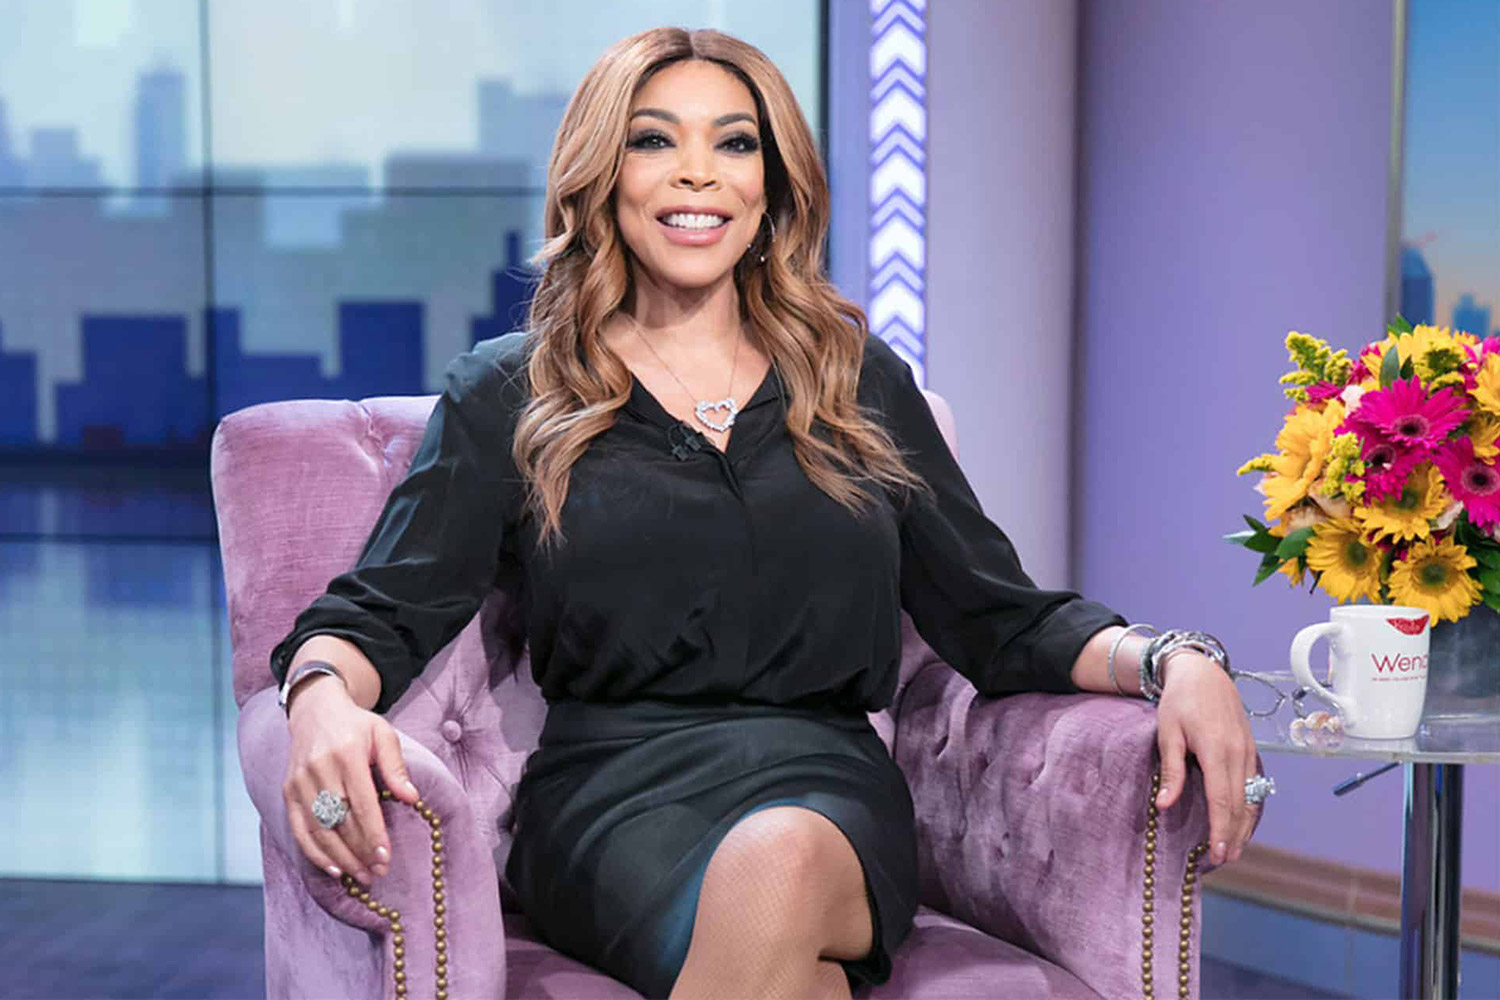 The Wendy Williams Show host takes time off work, return uncertain!